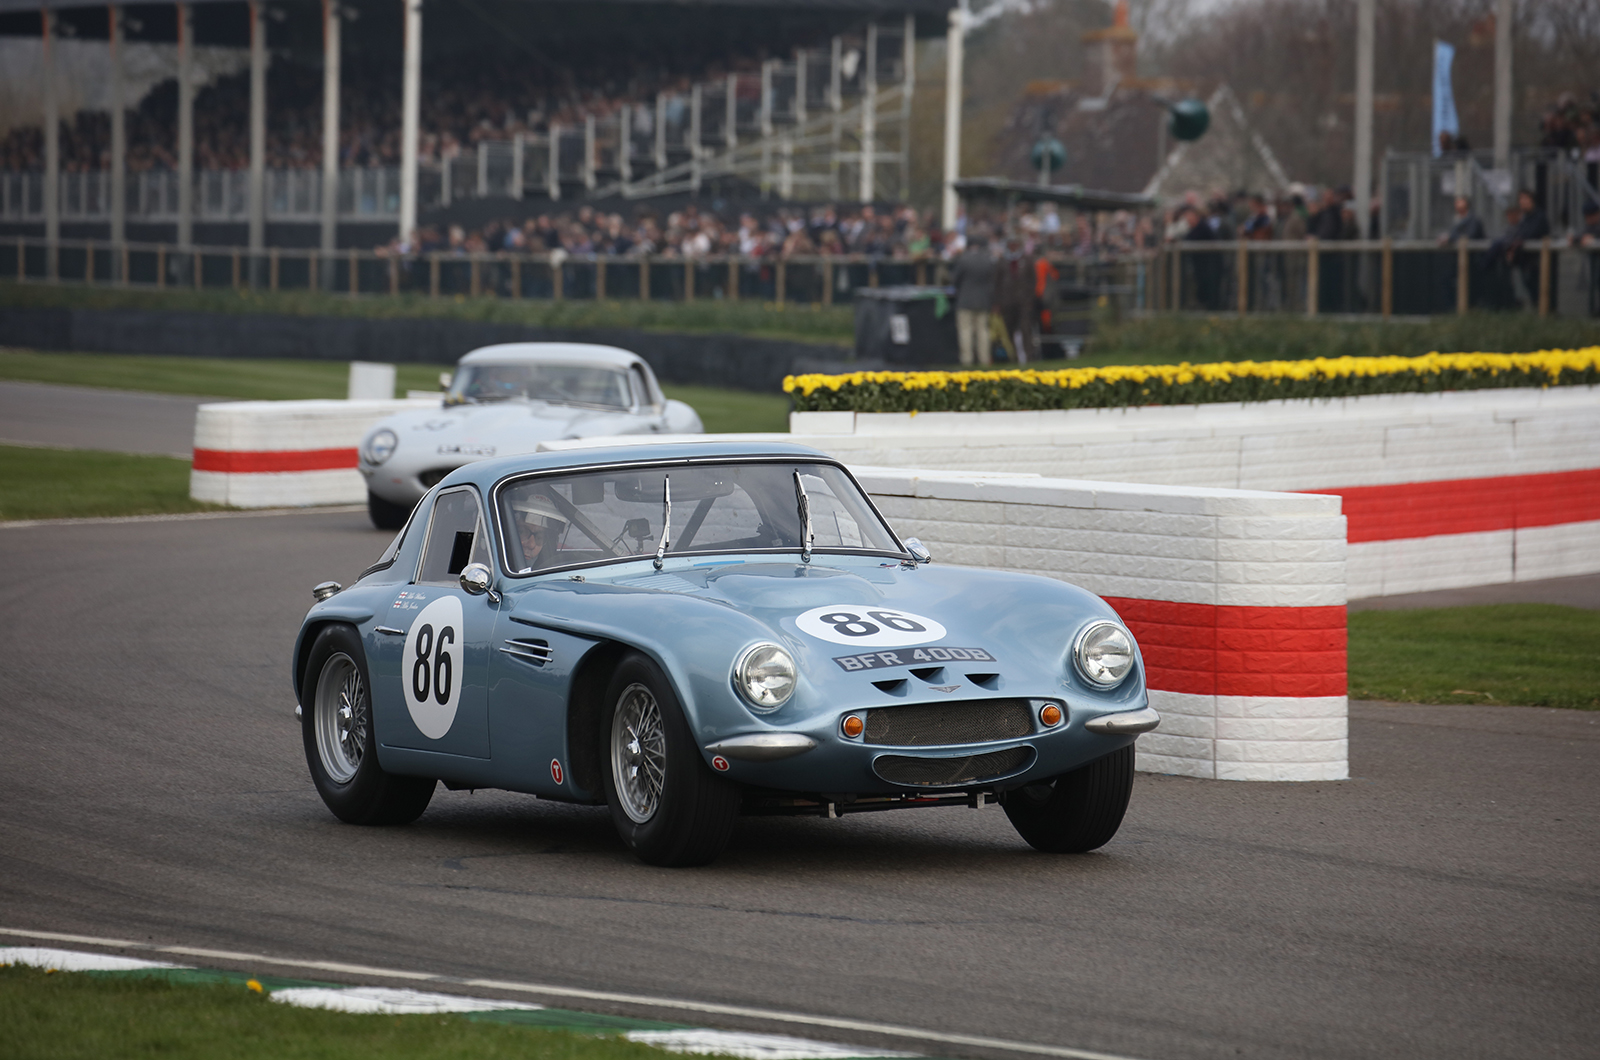 Classic & Sports Car – Who won what at the 77th Goodwood Members’ Meeting